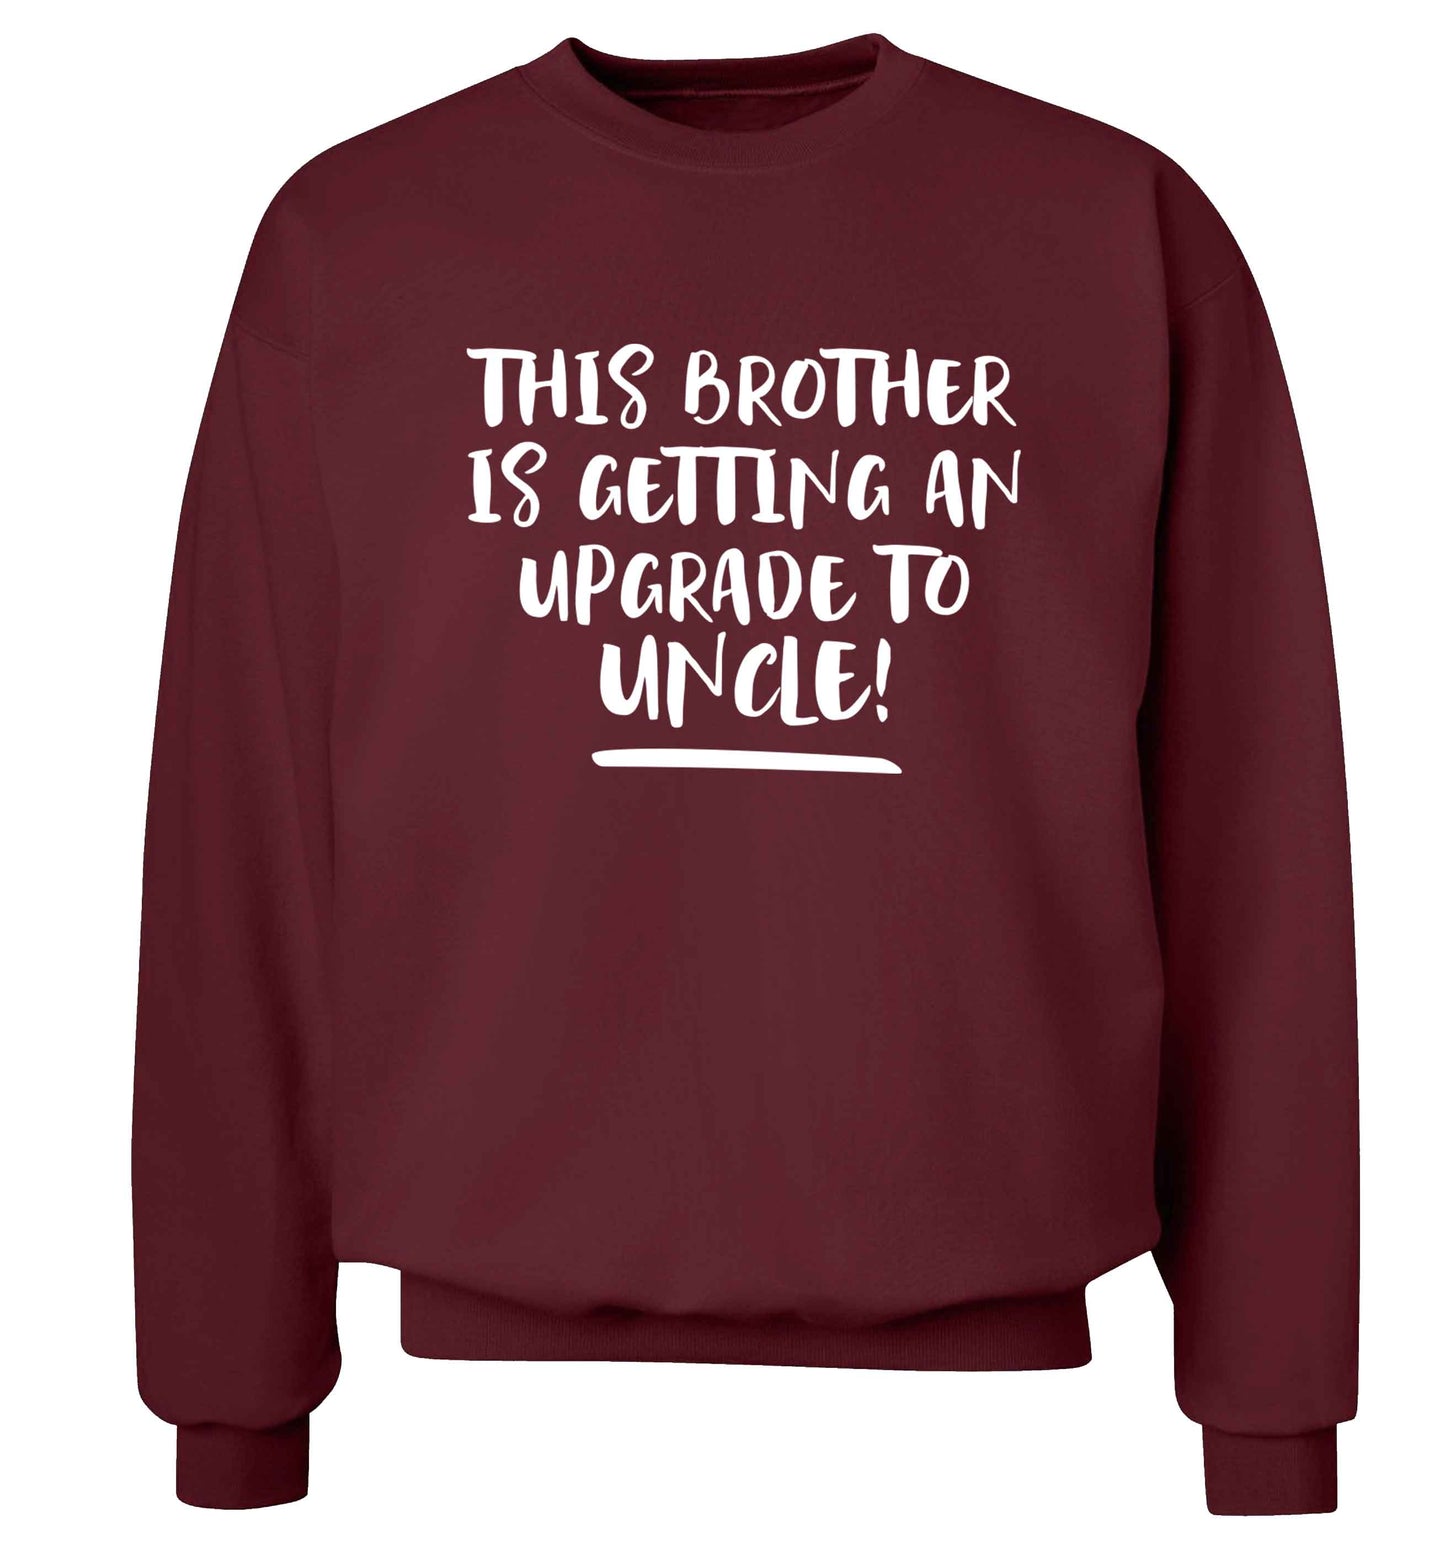 This brother is getting an upgrade to uncle! Adult's unisex maroon Sweater 2XL